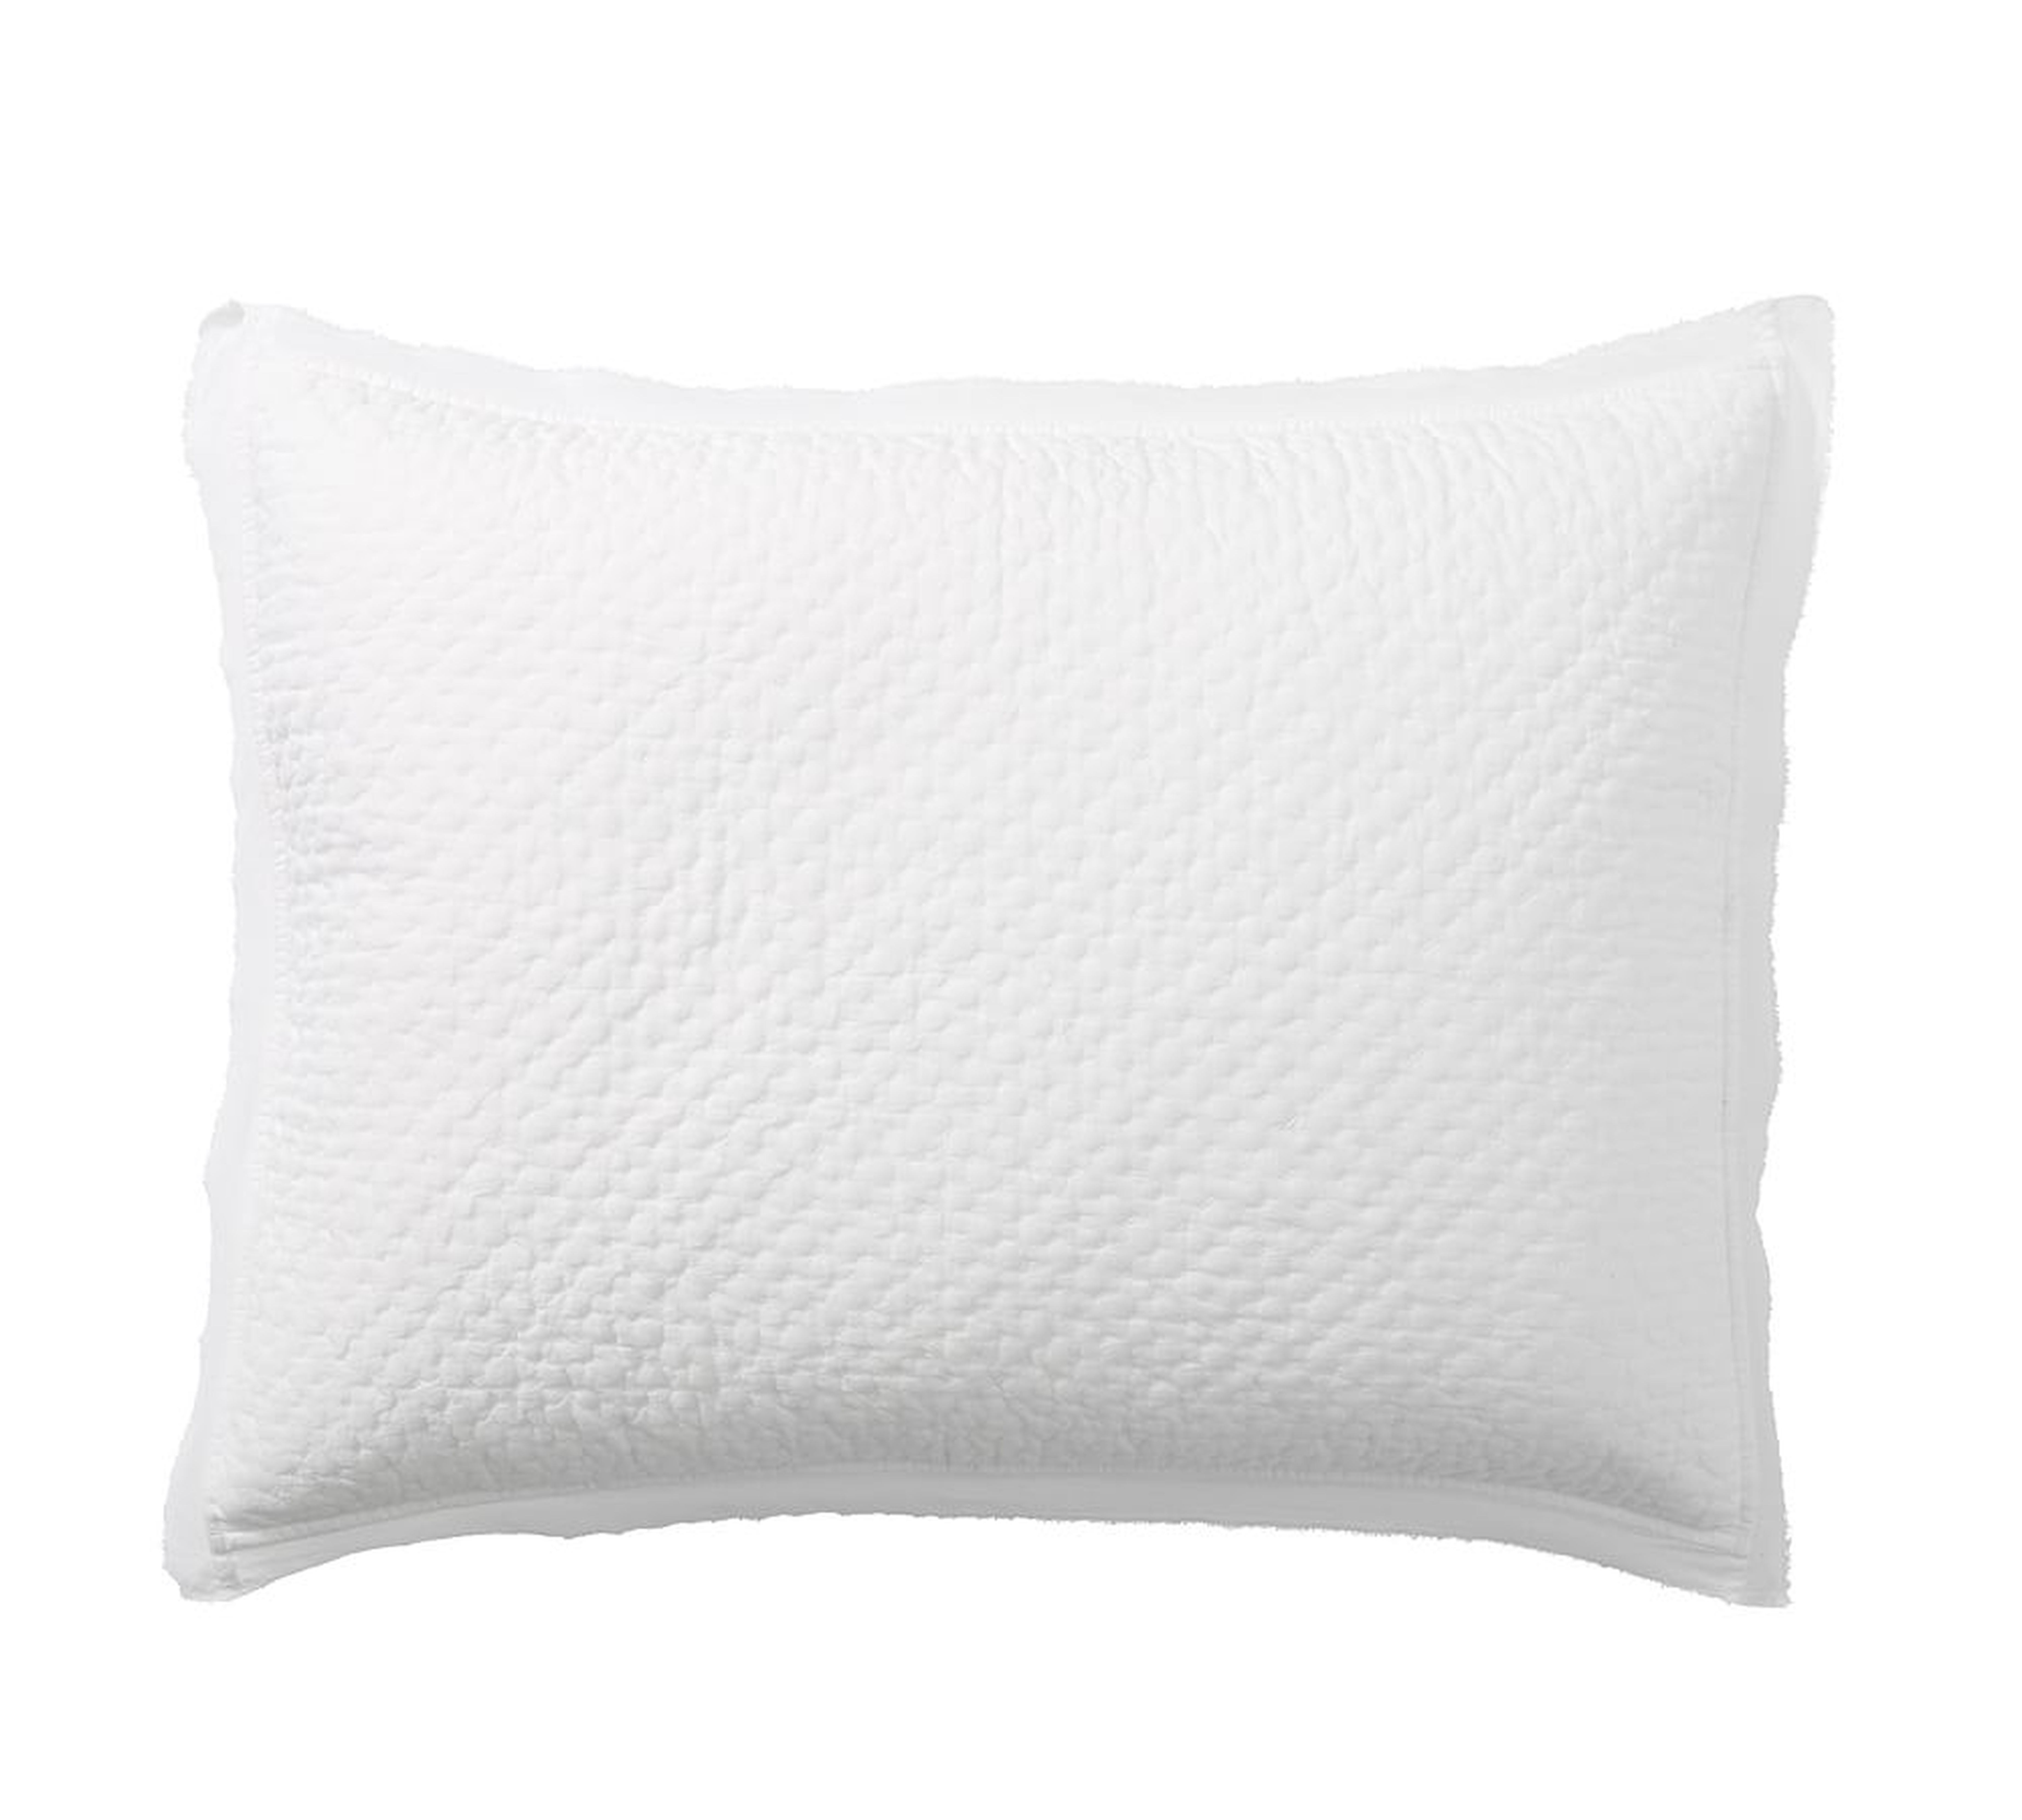 Cotton Handcrafted Melange Quilted Sham, Standard, White - Pottery Barn